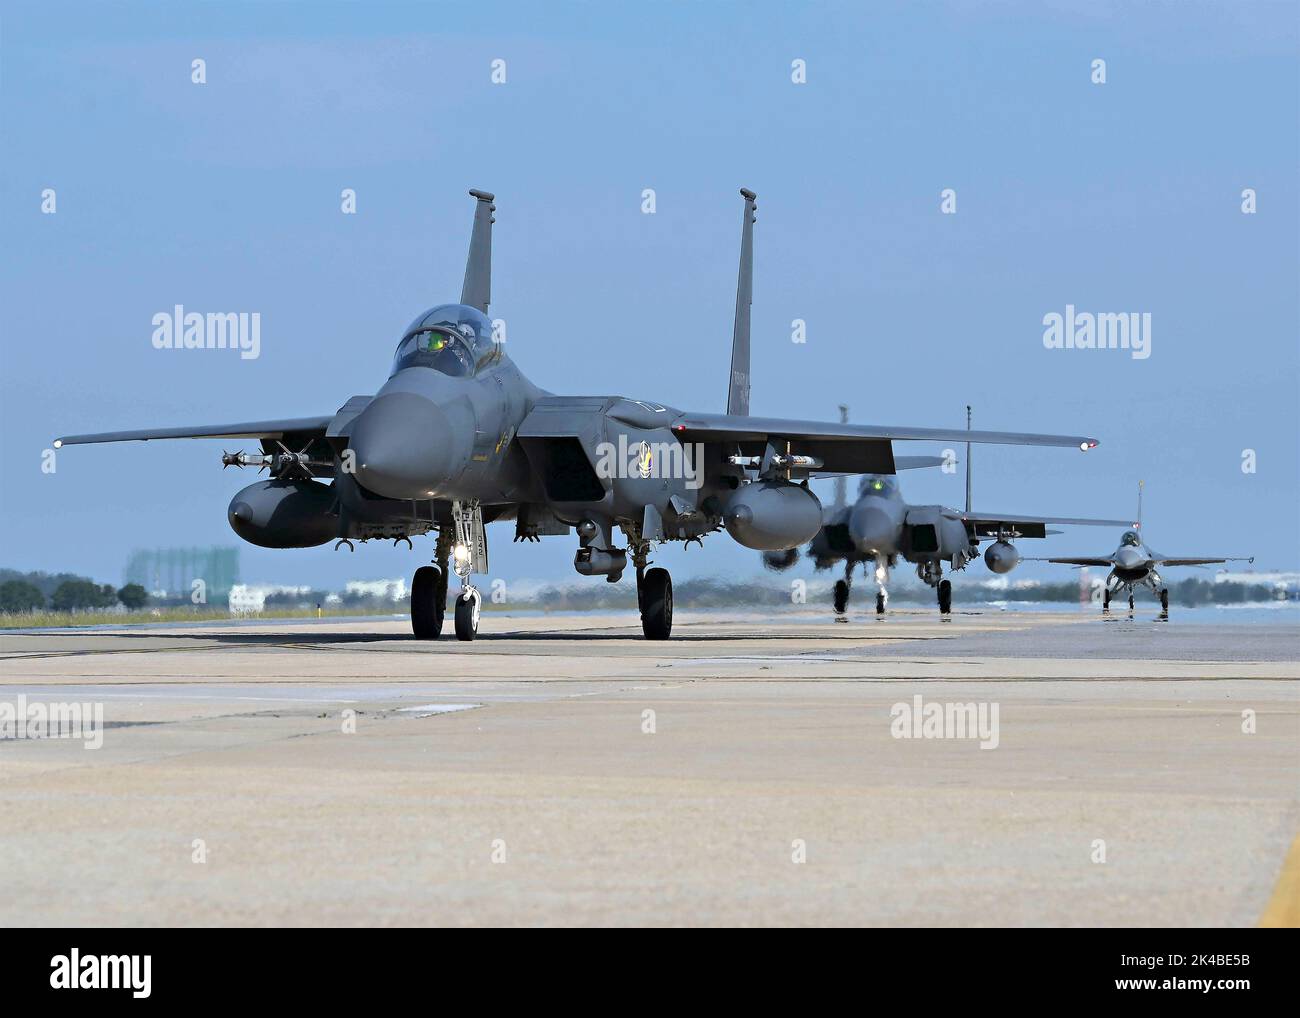 Gunsan, South Korea. 22 September, 2022. Republic of Korea Air Force F-15K Slam Eagle fighter aircraft, assigned to the ROK 110th Fighter Squadron, taxi on the flightline at Kunsan Air Base, September 22, 2022 in Gunsan, South Korea. Stock Photo